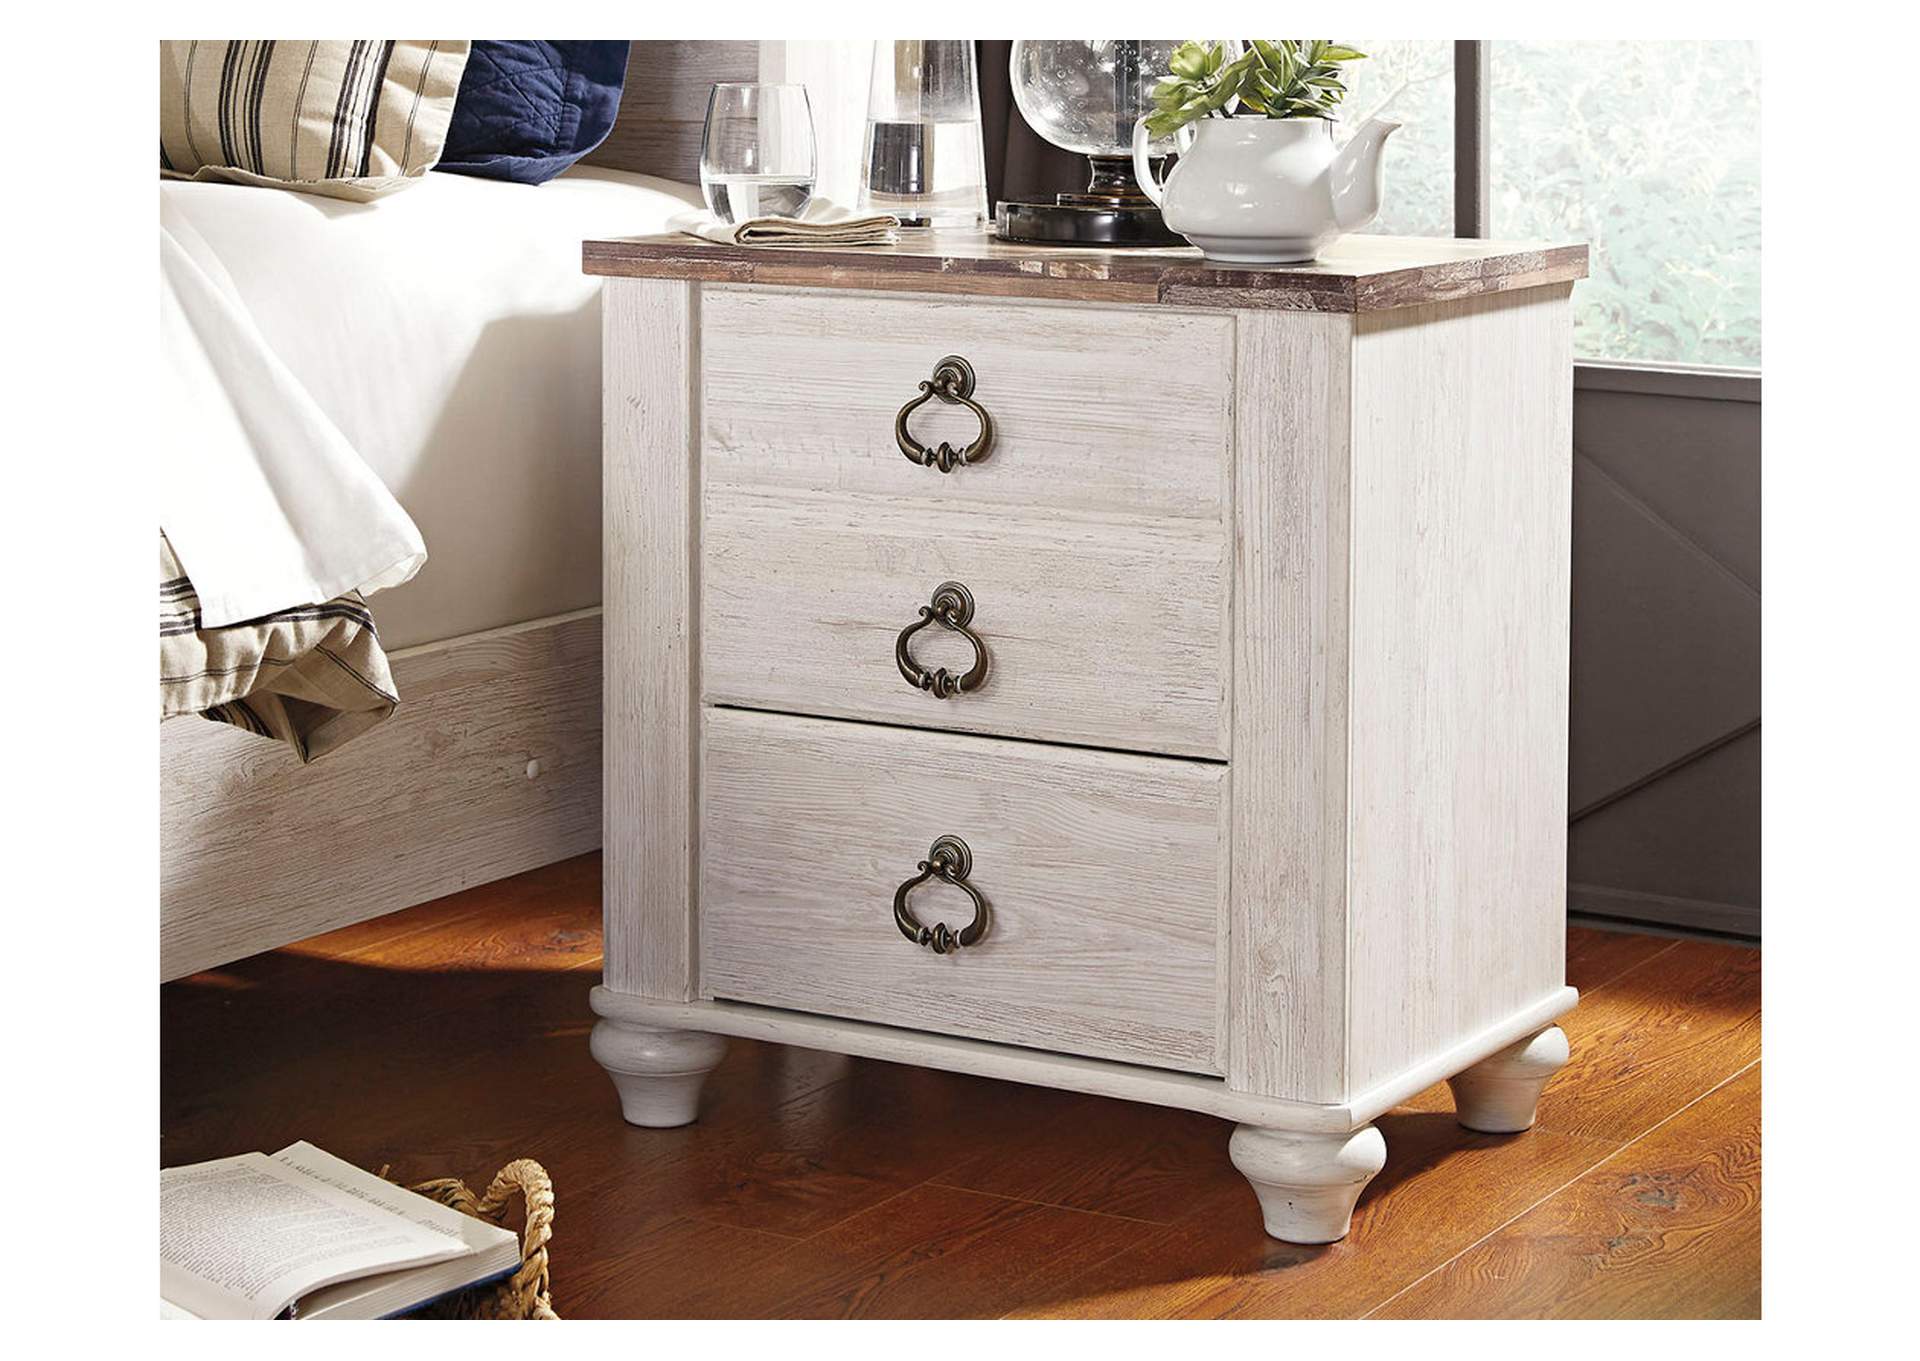 Willowton Twin Panel Bed with Nightstand,Signature Design By Ashley